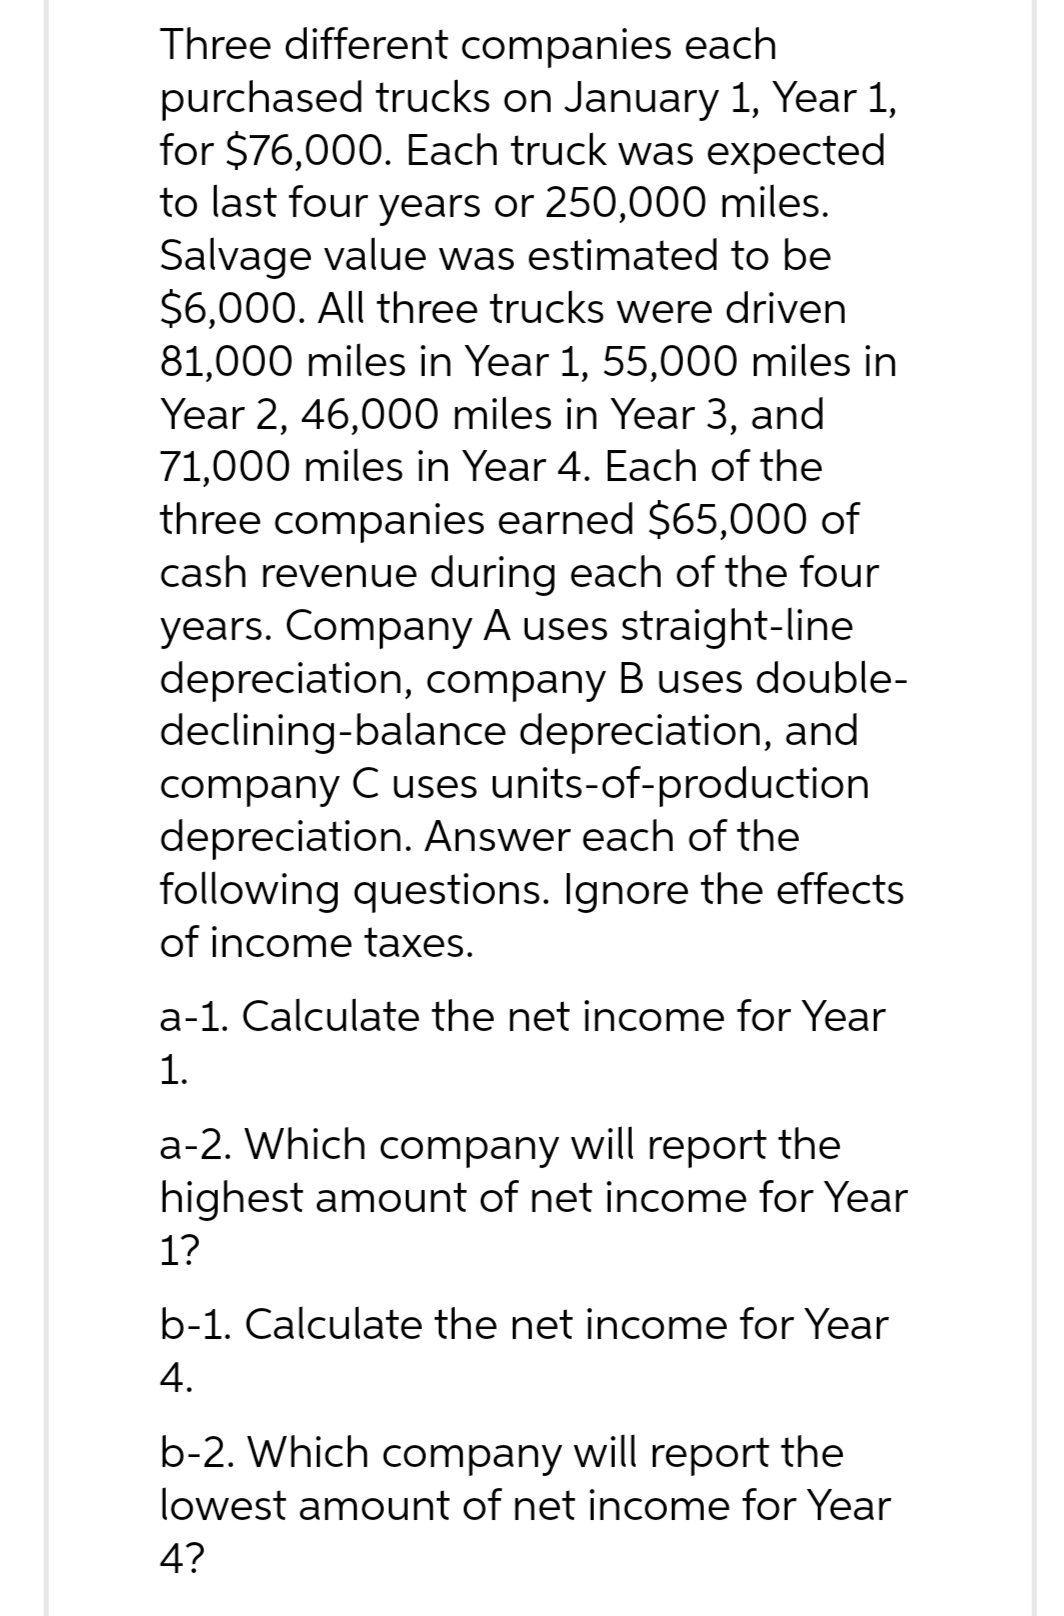 Three different companies each
purchased trucks on January 1, Year 1,
for $76,000. Each truck was expected
to last four years or 250,000 miles.
Salvage value was estimated to be
$6,000. All three trucks were driven
81,000 miles in Year 1, 55,000 miles in
Year 2, 46,000 miles in Year 3, and
71,000 miles in Year 4. Each of the
three companies earned $65,000 of
cash revenue during each of the four
years. Company A uses straight-line
depreciation, company B uses double-
declining-balance depreciation, and
company C uses units-of-production
depreciation. Answer each of the
following questions. Ignore the effects
of income taxes.
a-1. Calculate the net income for Year
1.
a-2. Which company will report the
highest amount of net income for Year
1?
b-1. Calculate the net income for Year
4.
b-2. Which company will report the
lowest amount of net income for Year
4?